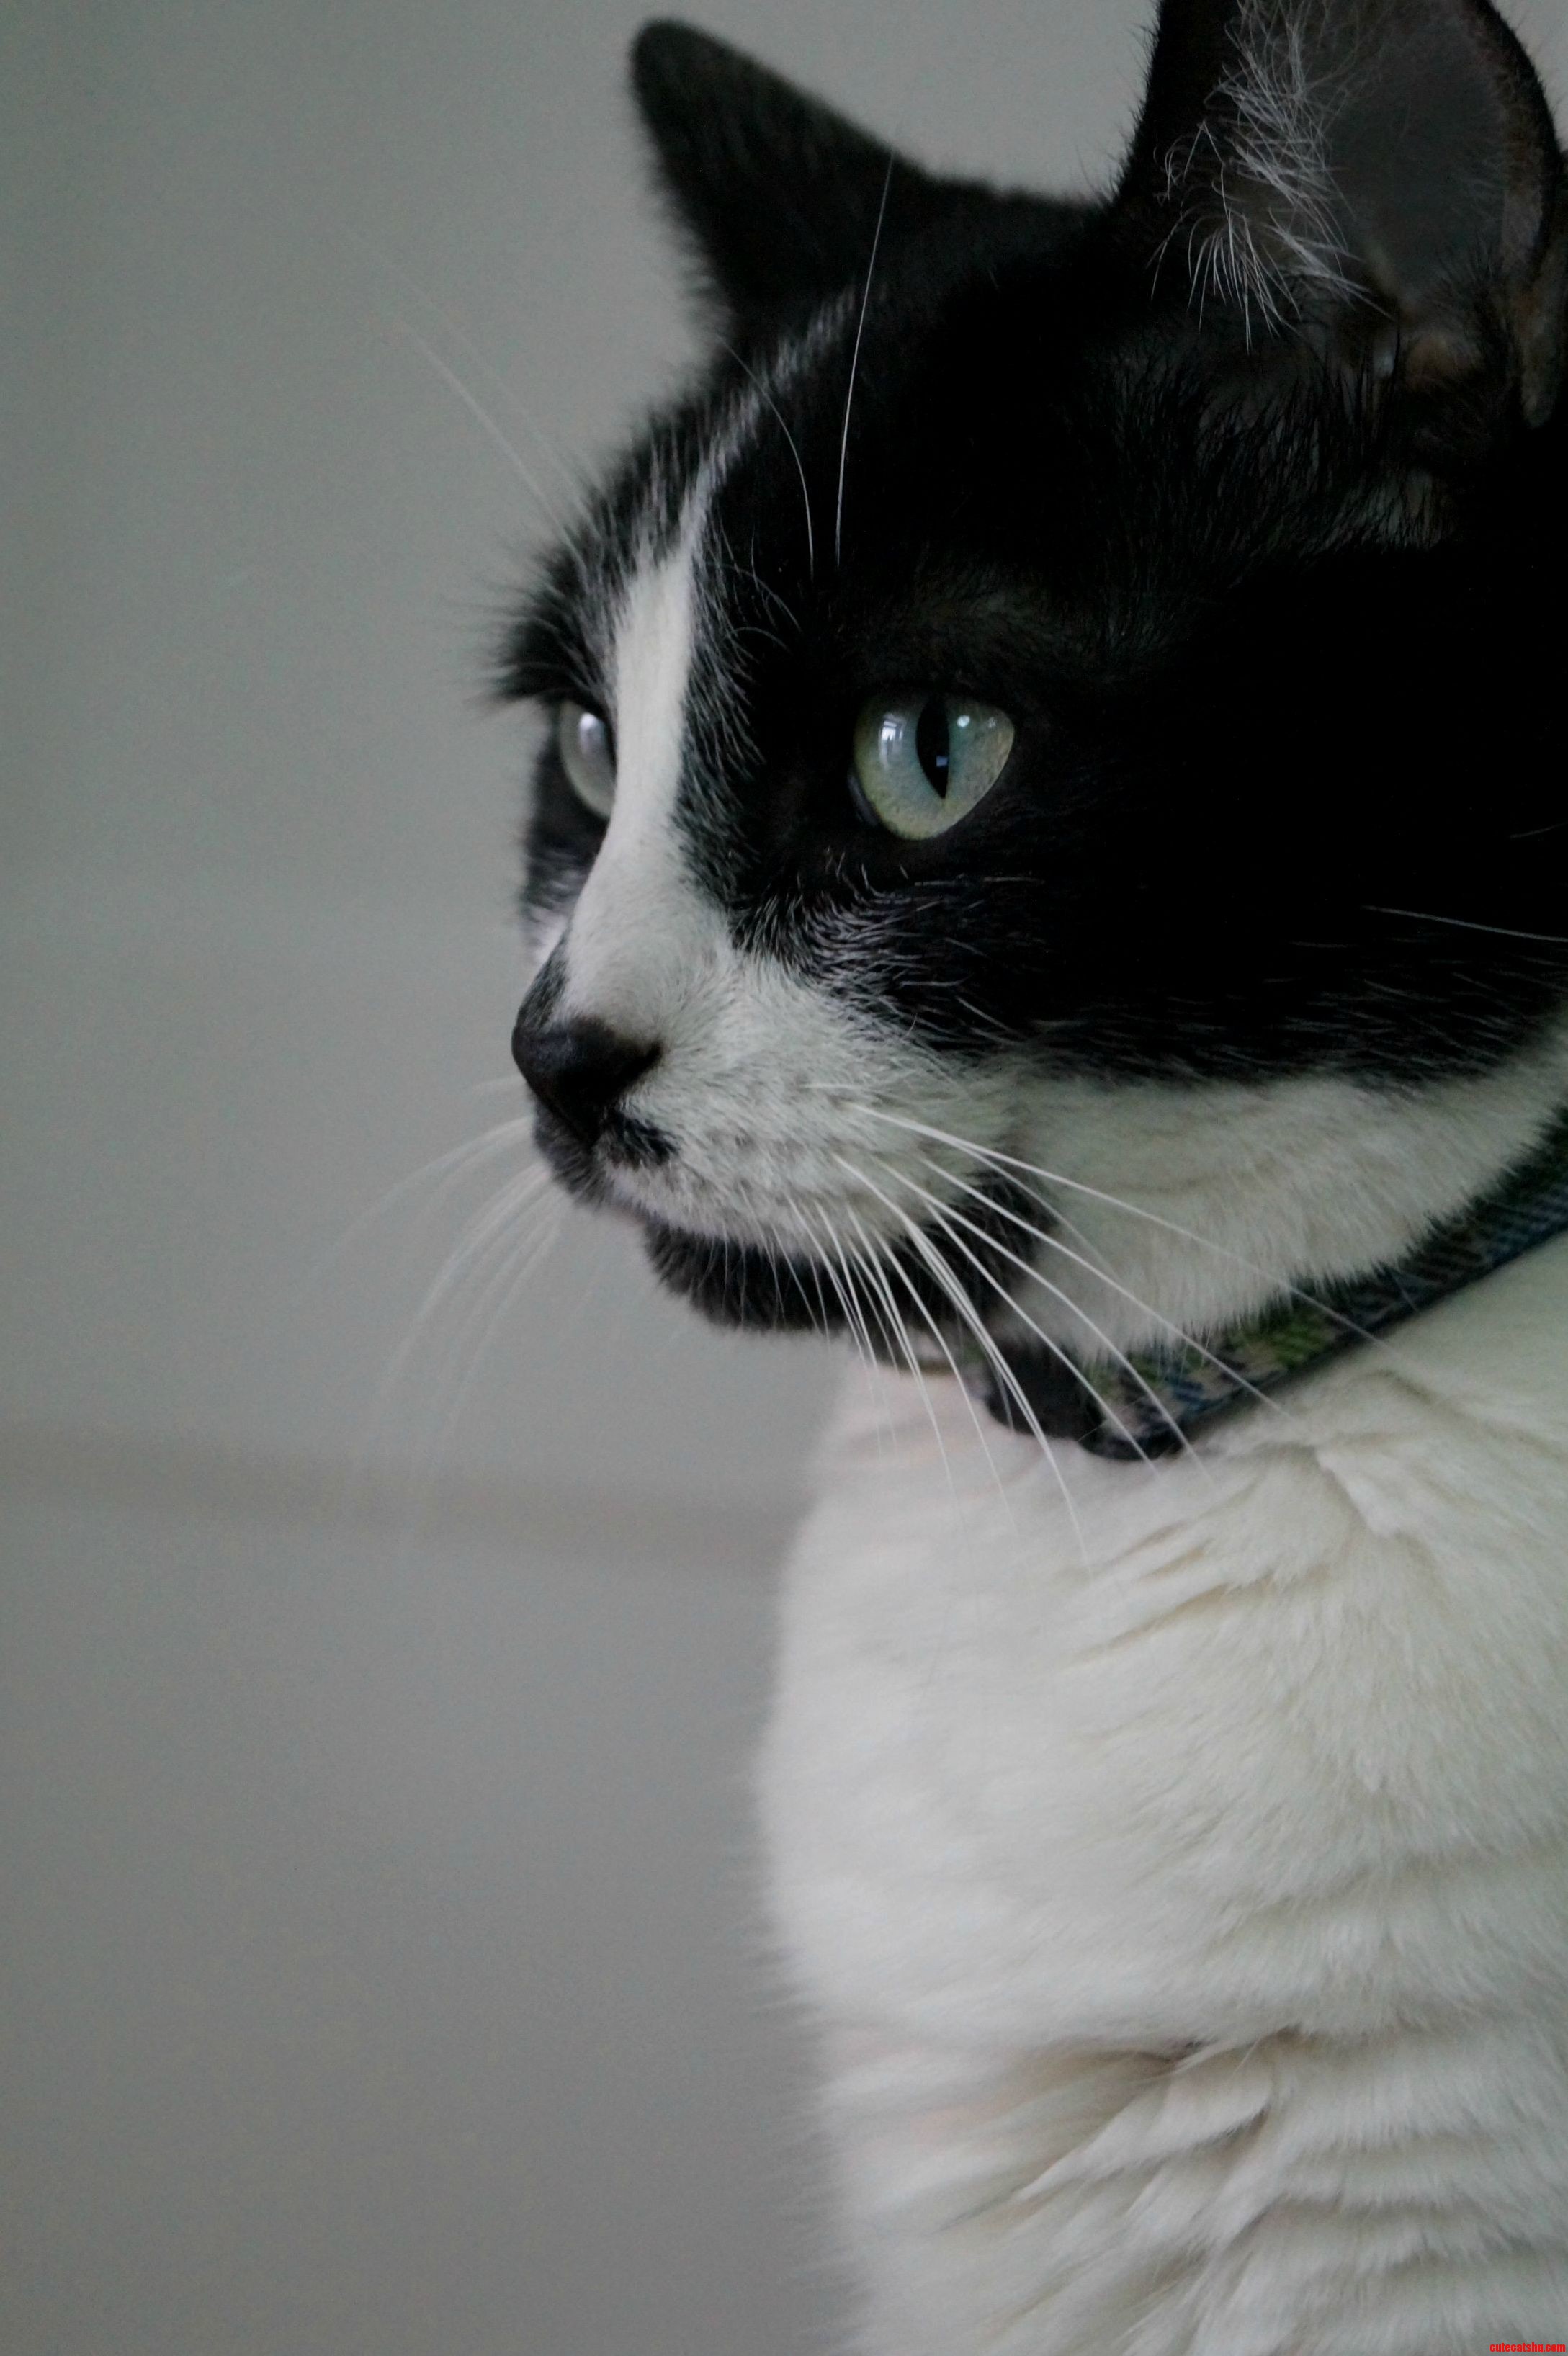 Intended Use Of My New Camera Taking Pictures Of My Cat Gatsby.